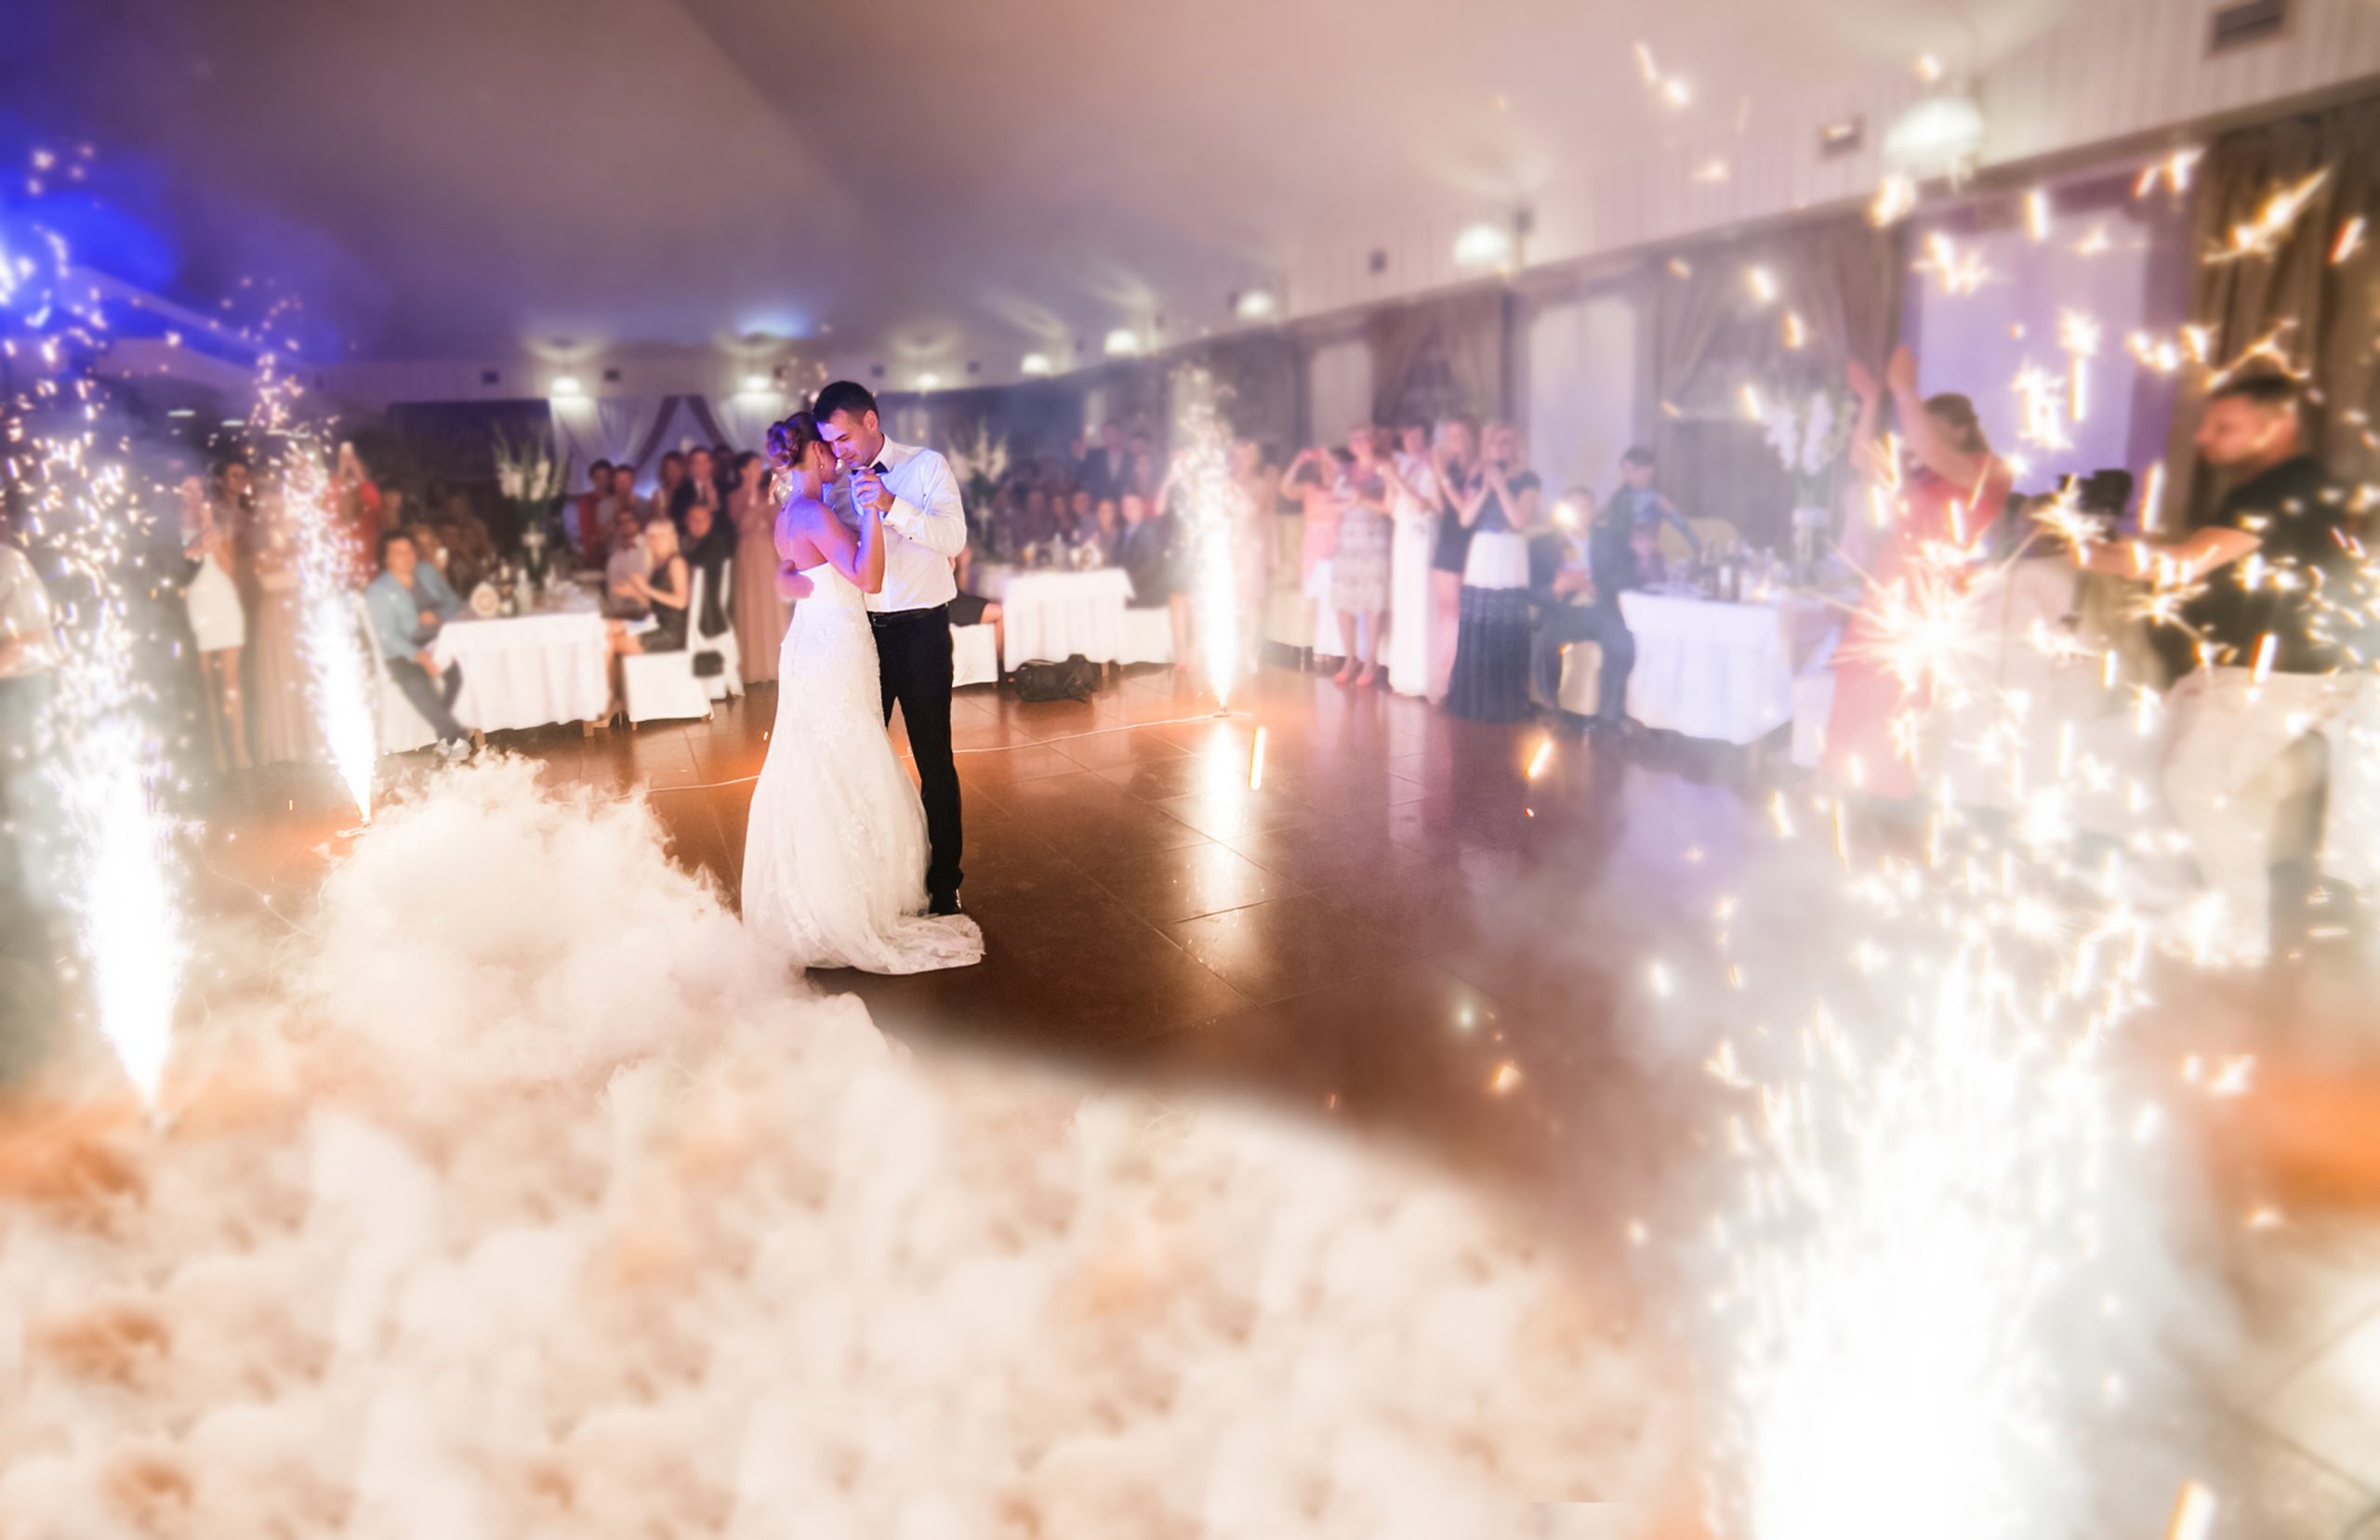 Three Things That All Wedding Event Centers Near Minneapolis, MN Should Have